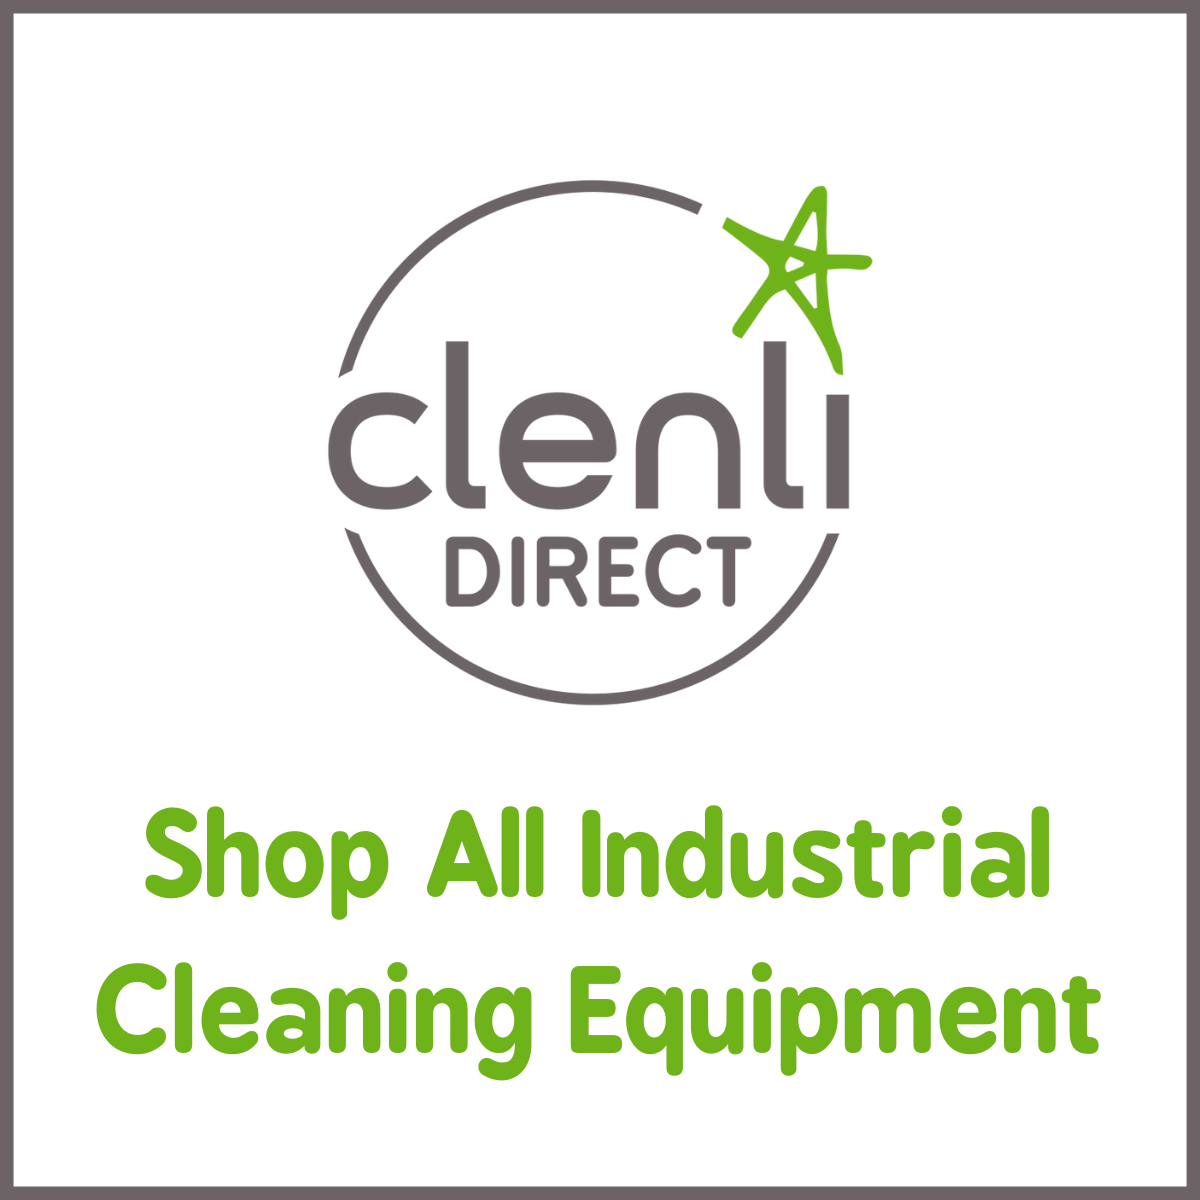 Clenli Direct - Shop All Industrial Cleaning Equipment